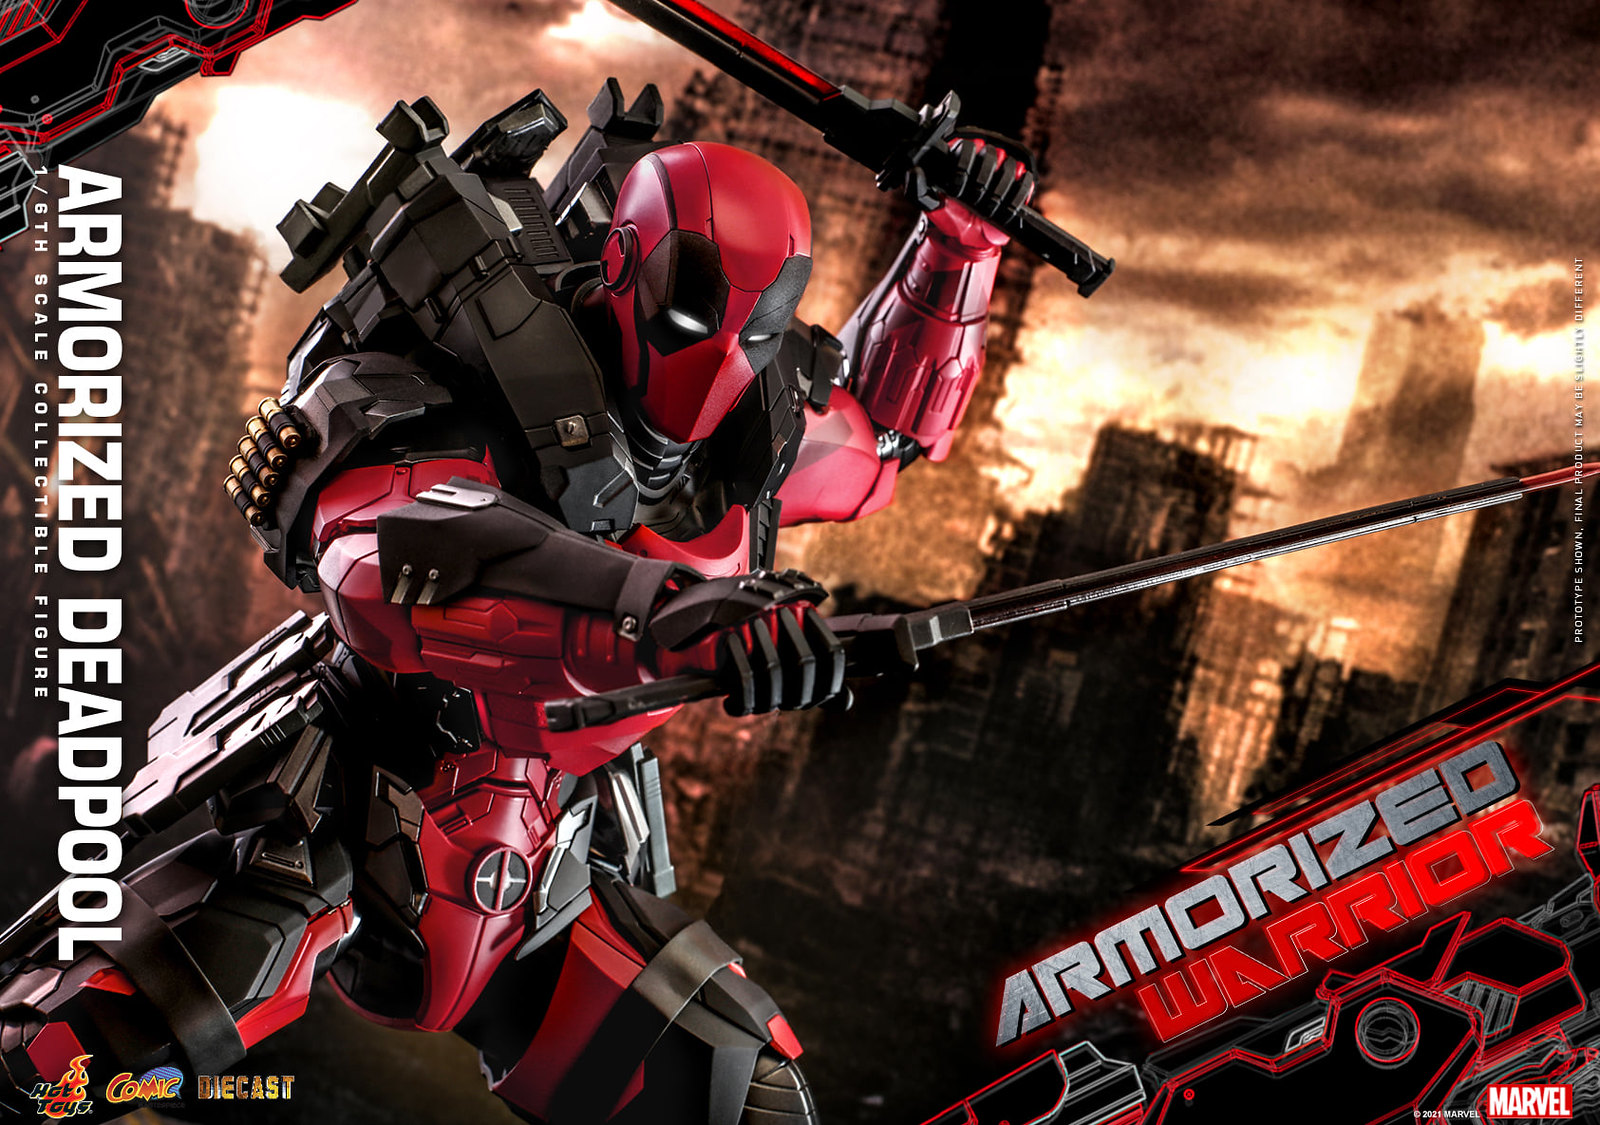 NEW PRODUCT: Hot Toys Armorized Warrior - 1/6th scale Armorized Deadpool Collectible Figure [Armorized Warrior Collection] 51310496127_bb66901859_h